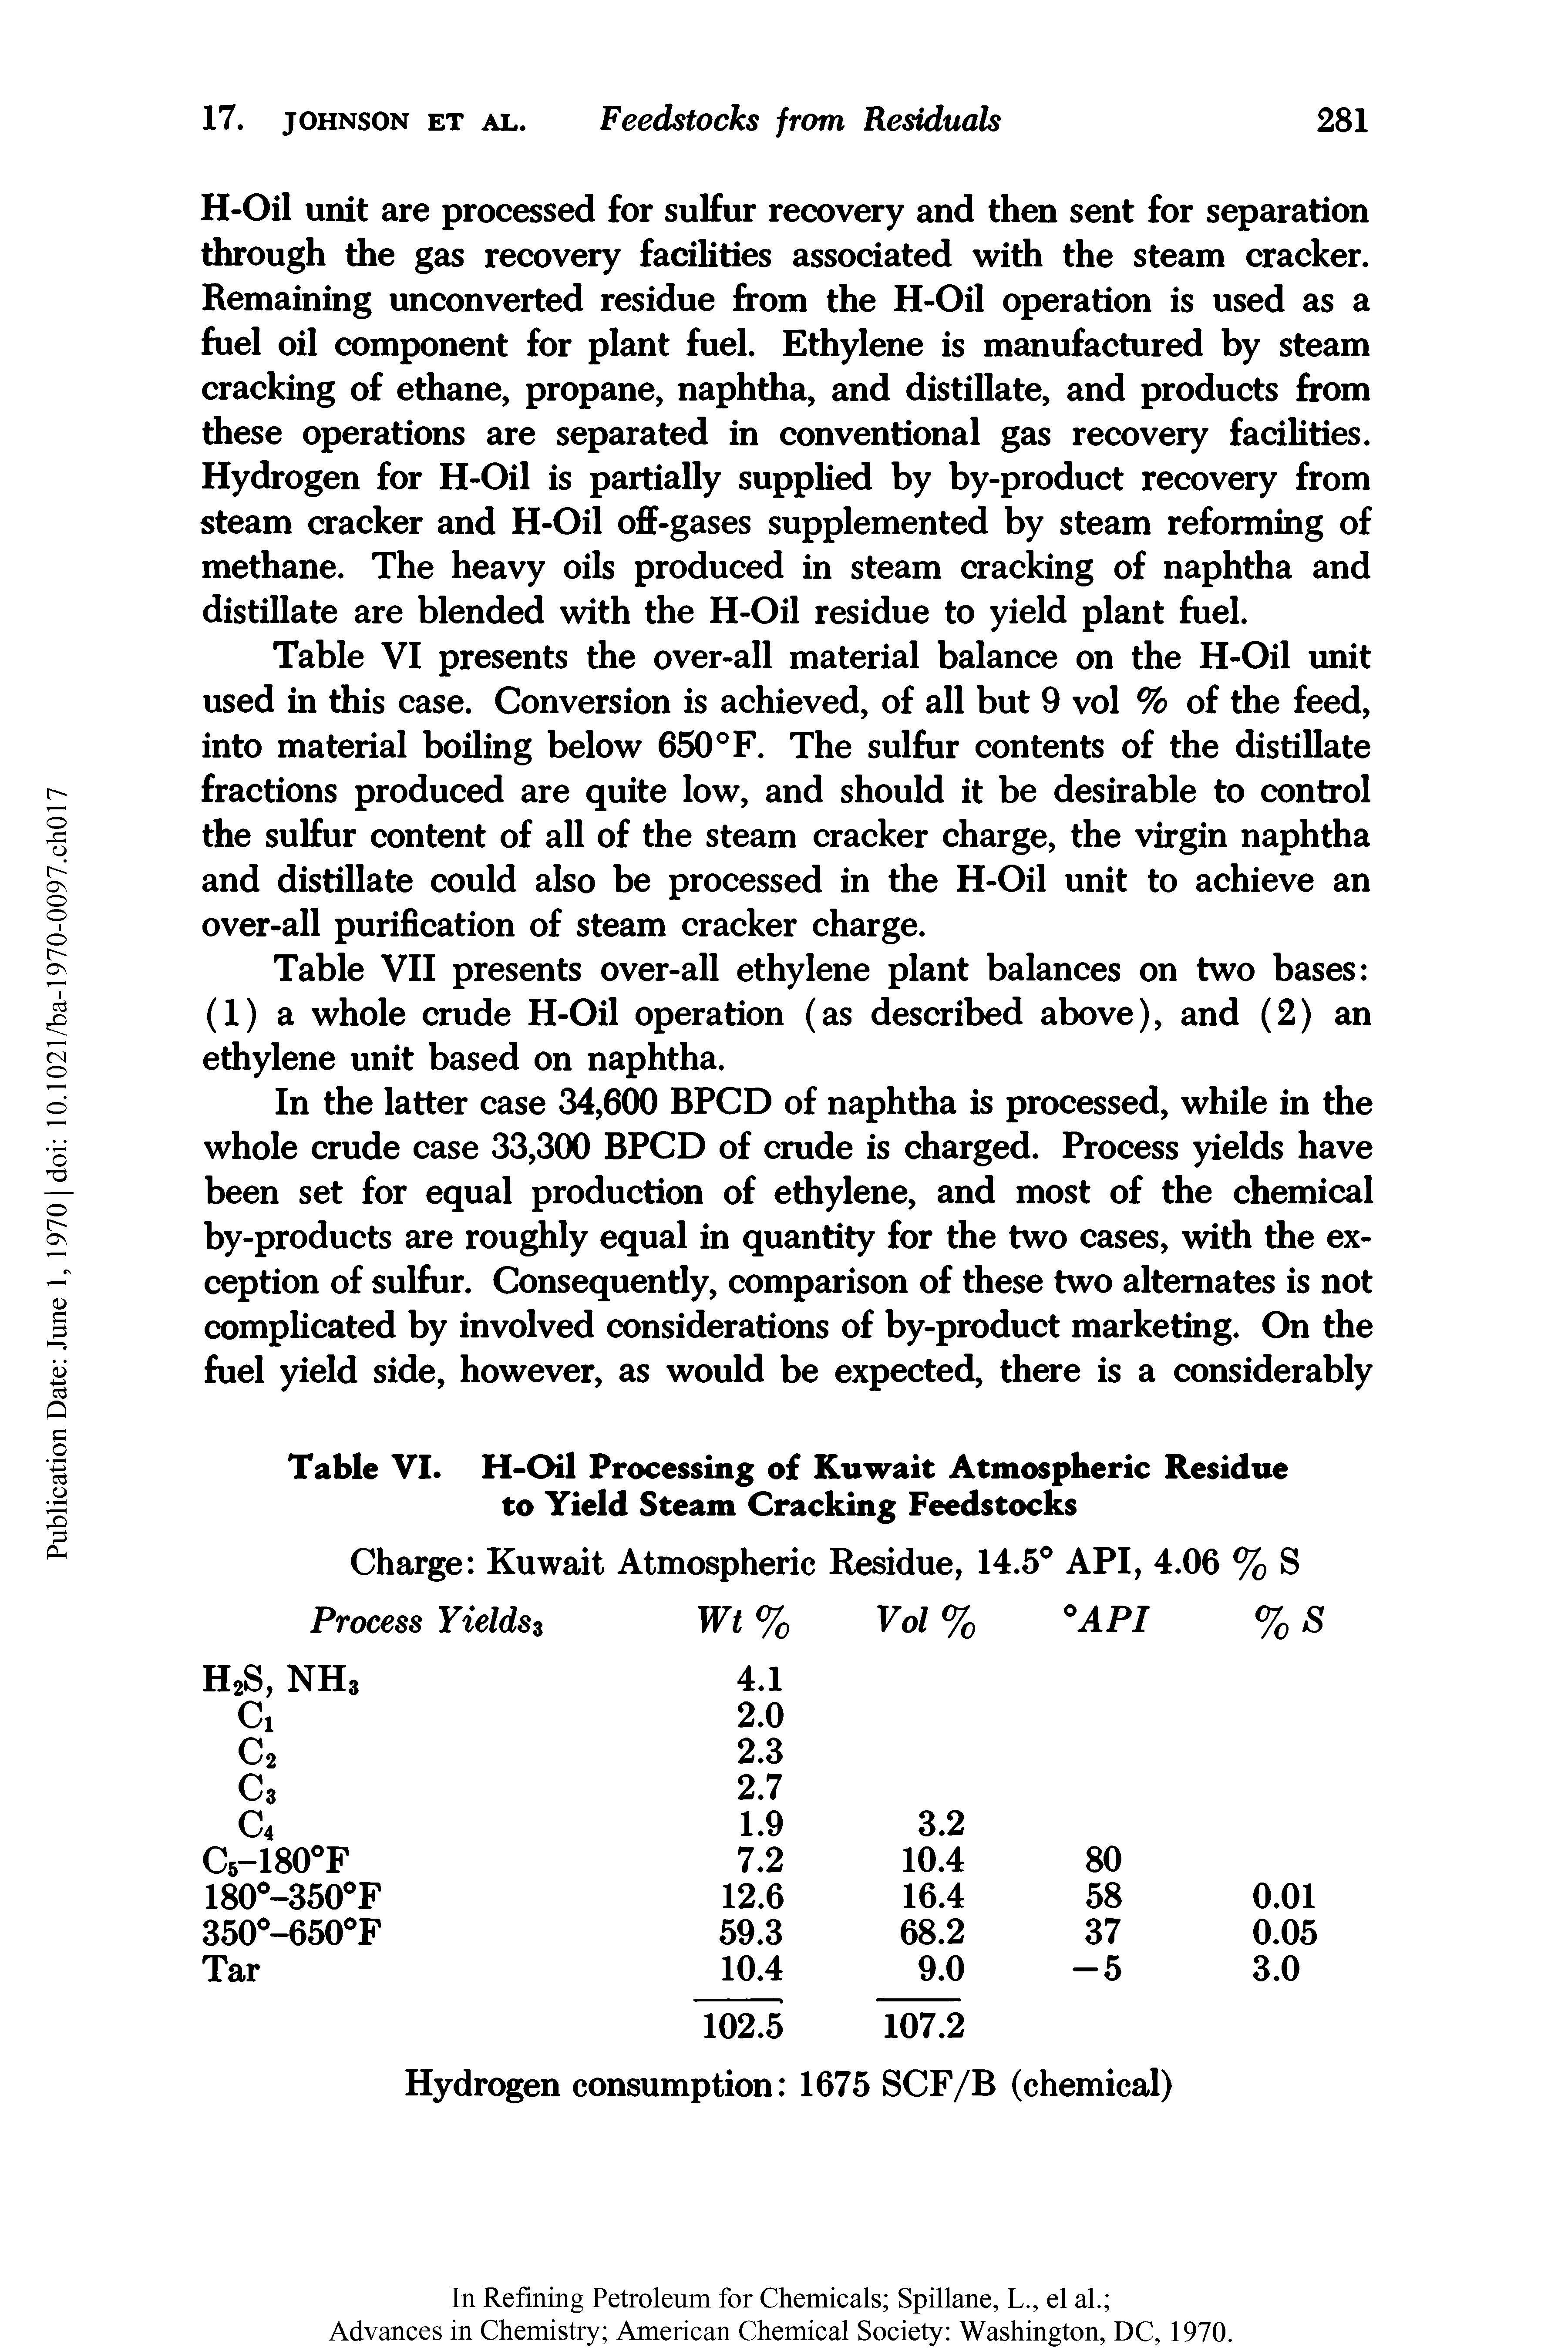 Table VI presents the over-all material balance on the H-Oil unit used in this case. Conversion is achieved, of all but 9 vol % of the feed, into material boiling below 650°F. The sulfur contents of the distillate fractions produced are quite low, and should it be desirable to control the sulfur content of all of the steam cracker charge, the virgin naphtha and distillate could also be processed in the H-Oil unit to achieve an over-all purification of steam cracker charge.